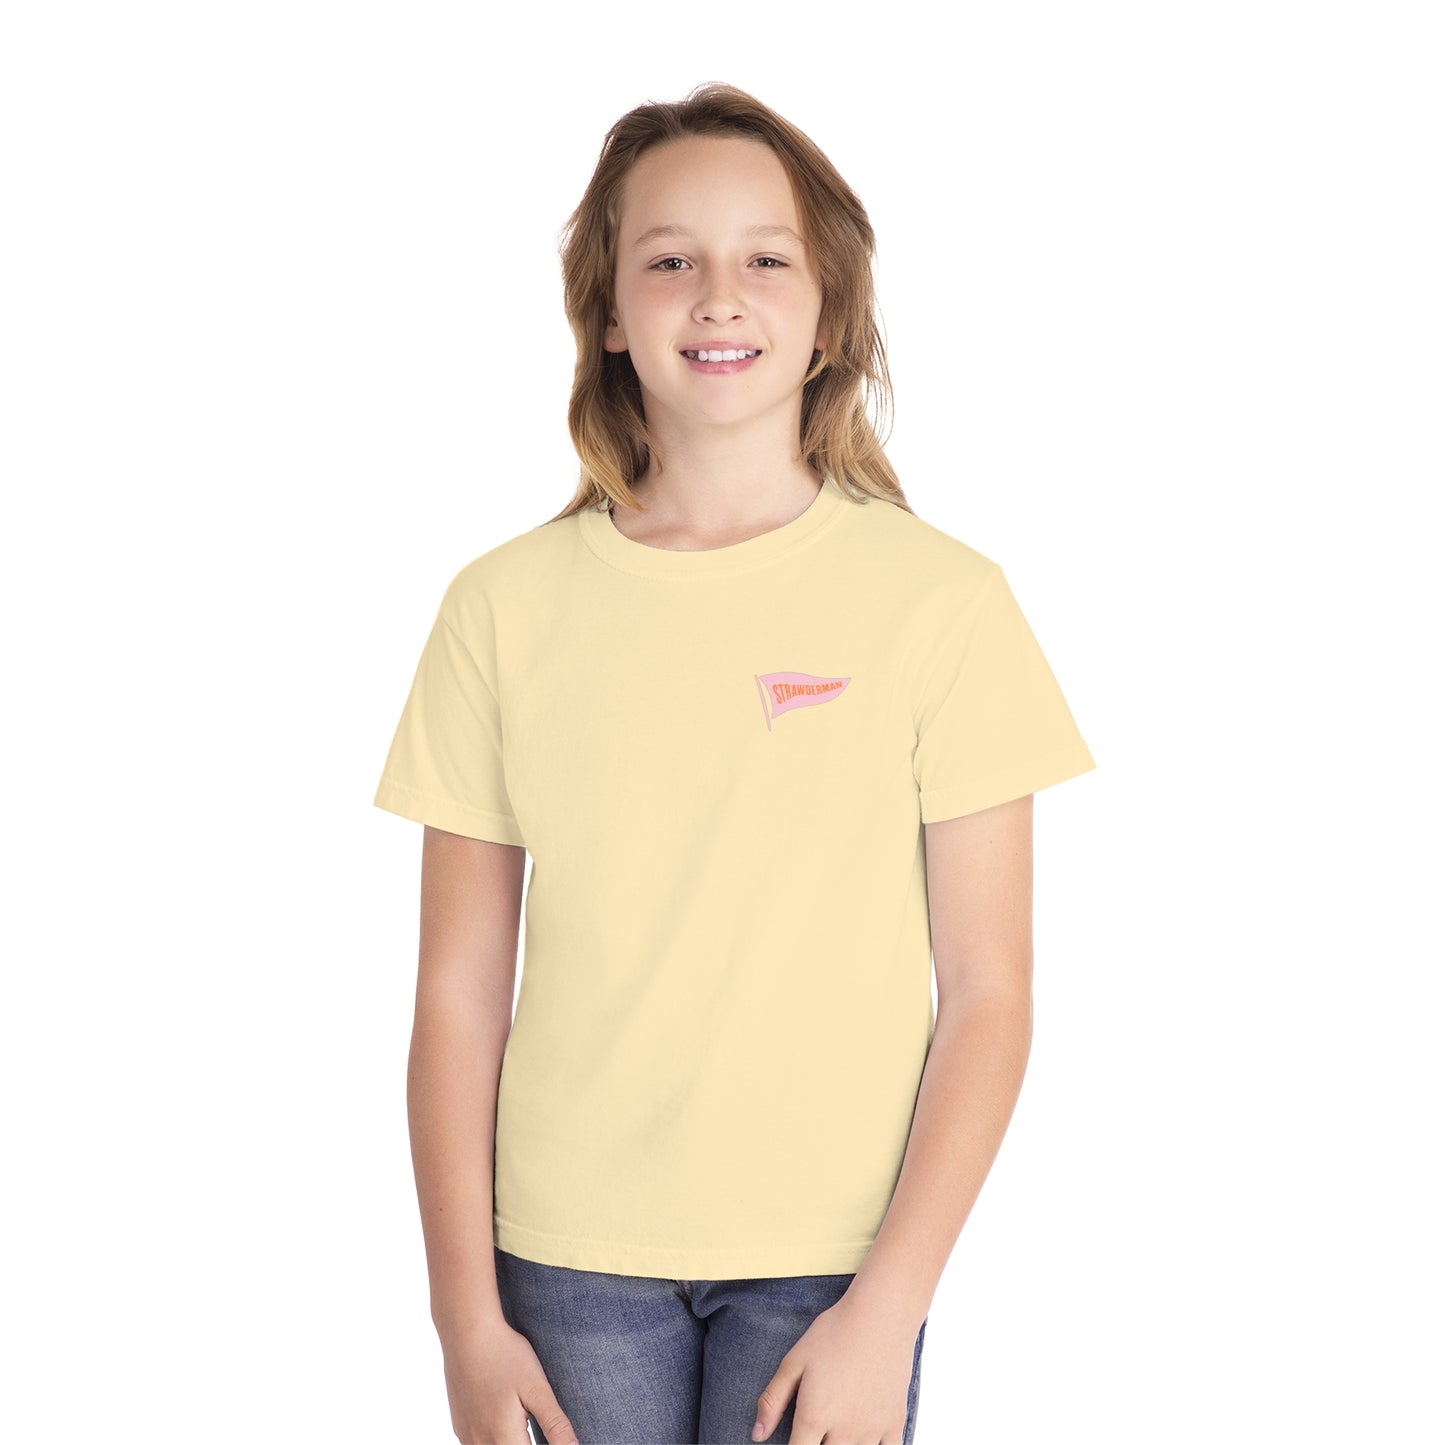 Pennant Youth Midweight Tee